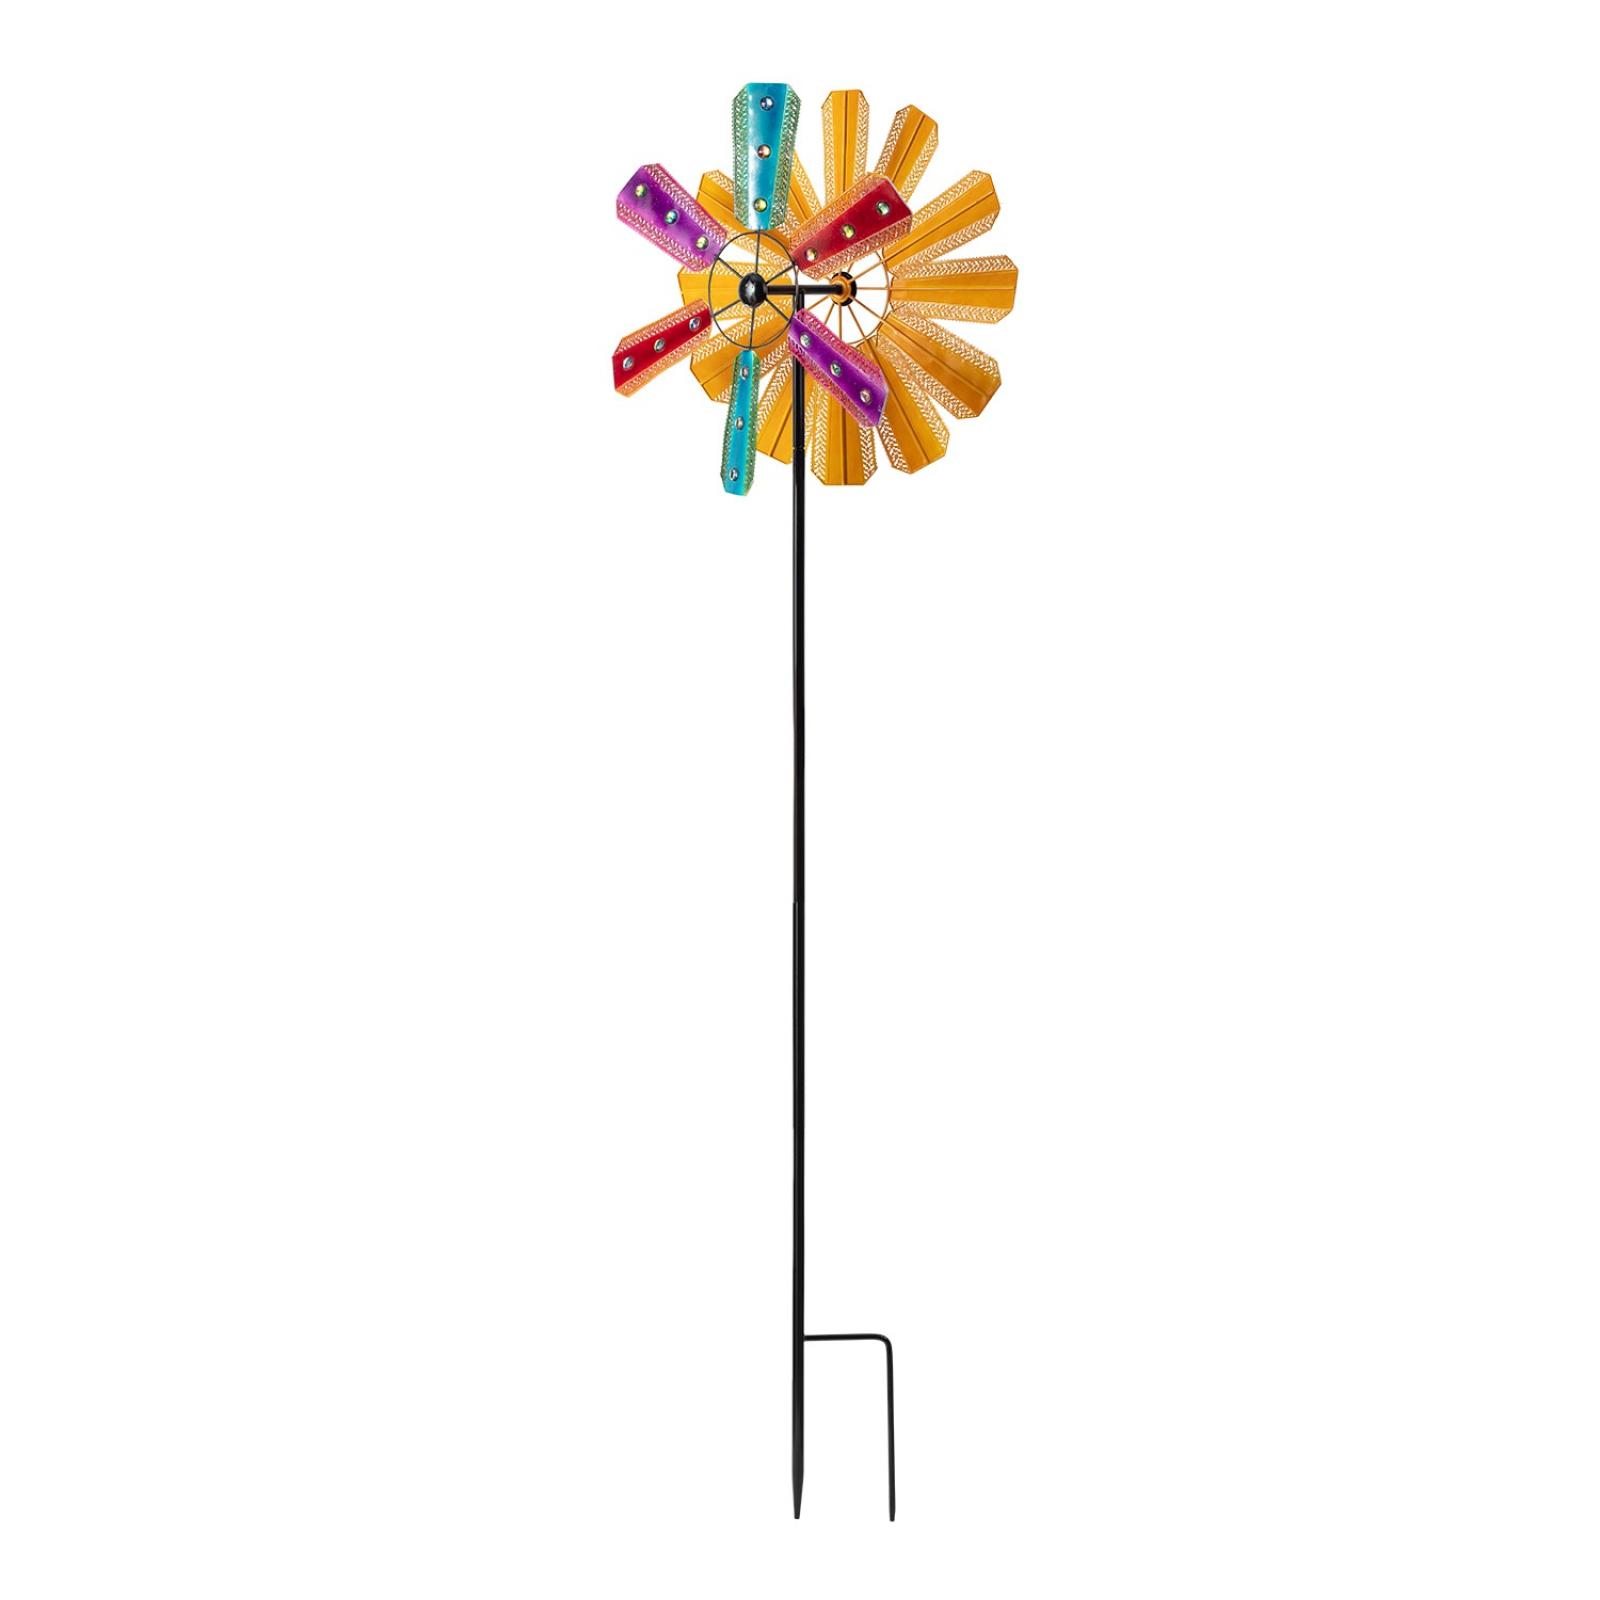 Alpine Jeweled Colorful Dual Spinner Garden Stake